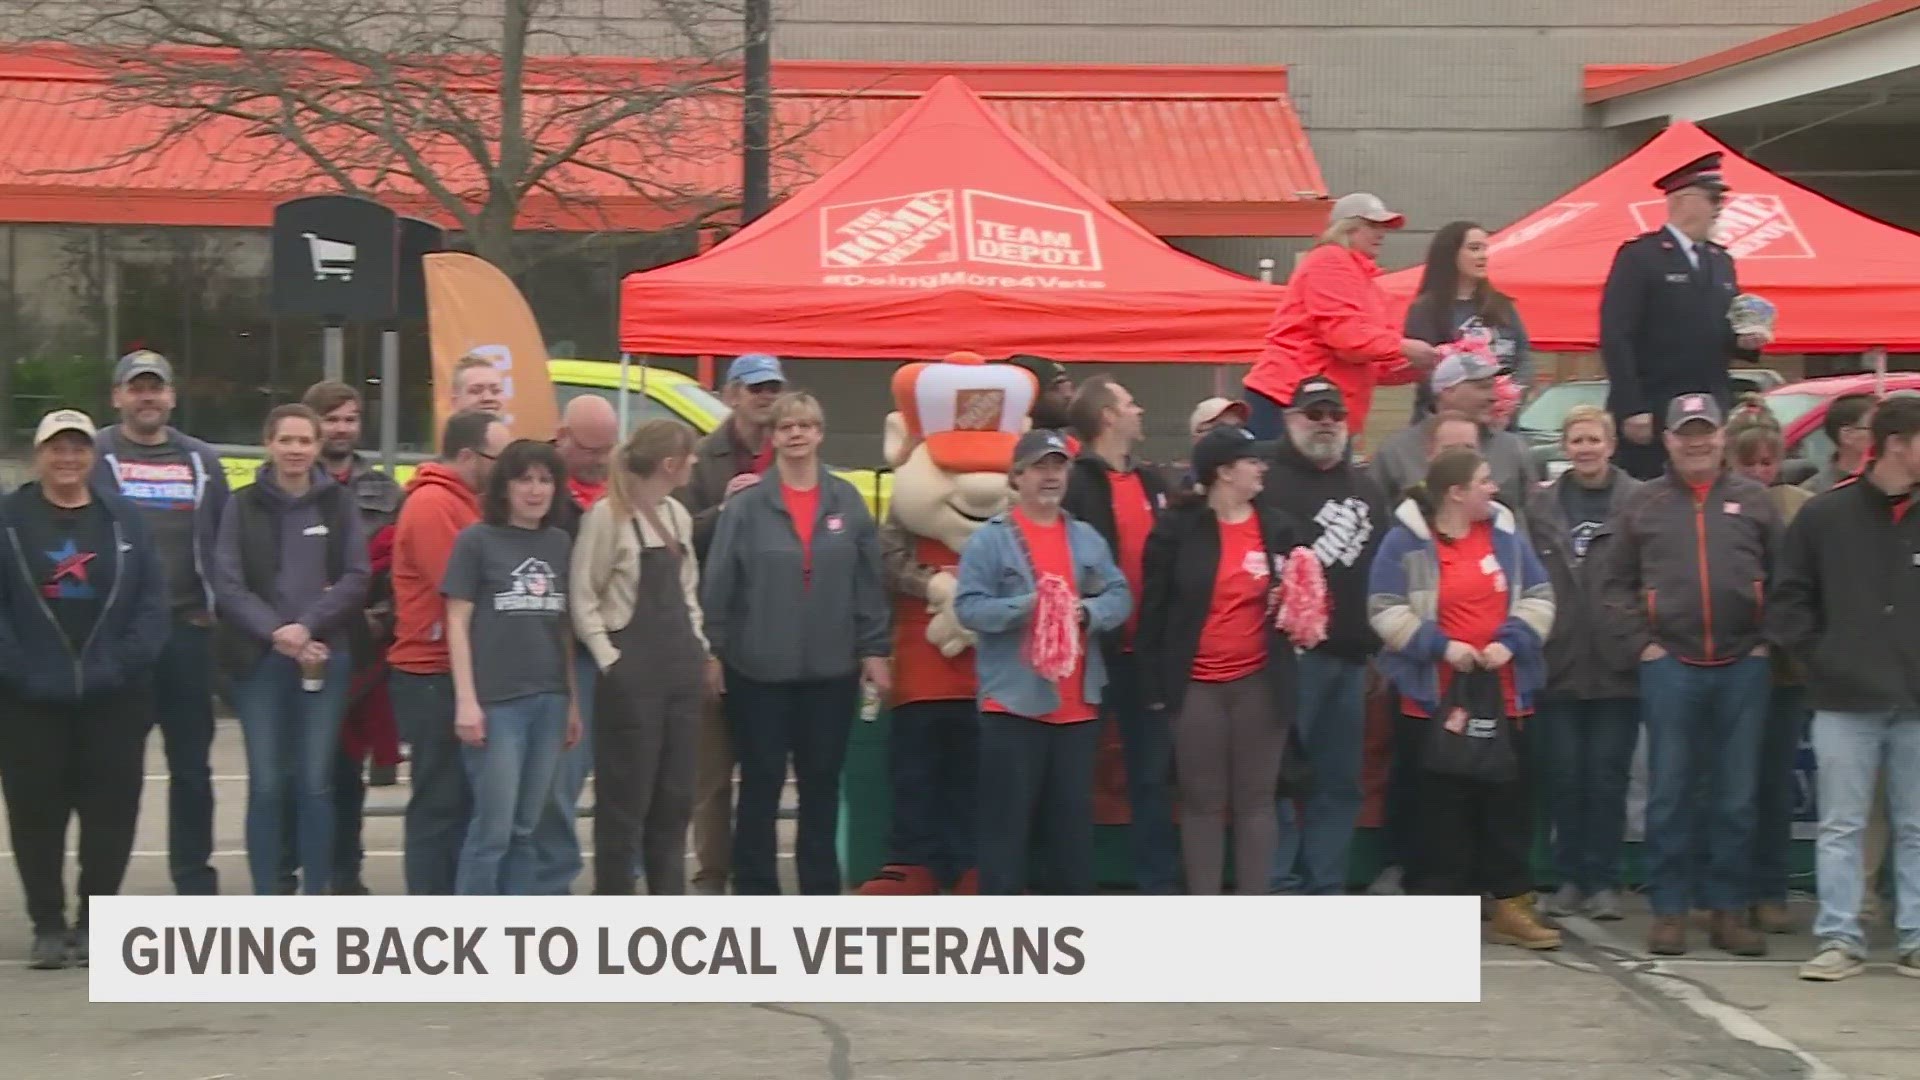 Workers with two national organizations will help 18 local veterans with their home improvement or beautification projects.